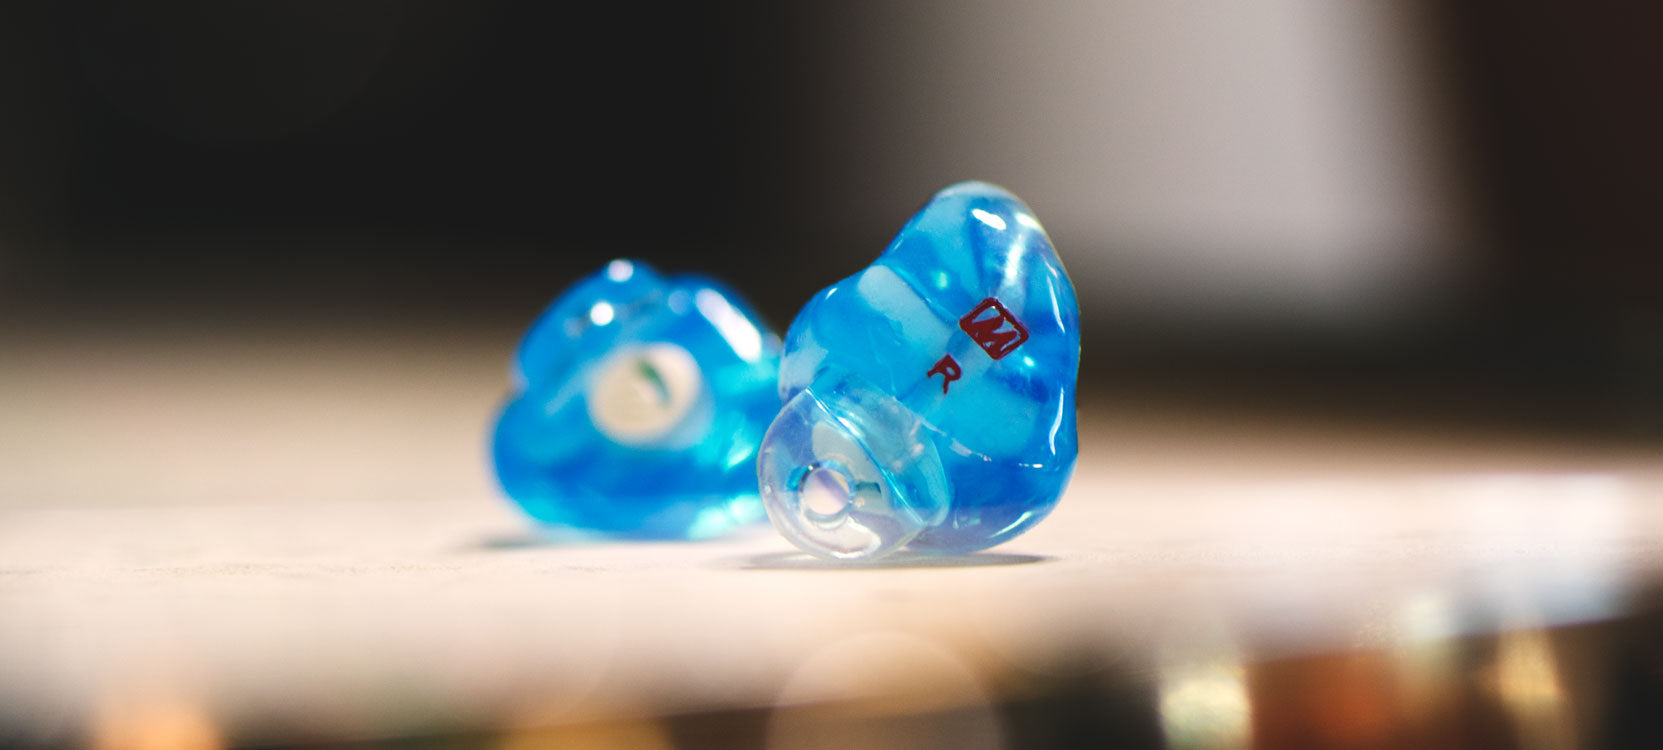 Two custom-molded, blue in-ear monitors with a "r" marking on one, focused closely on a blurry wooden surface.